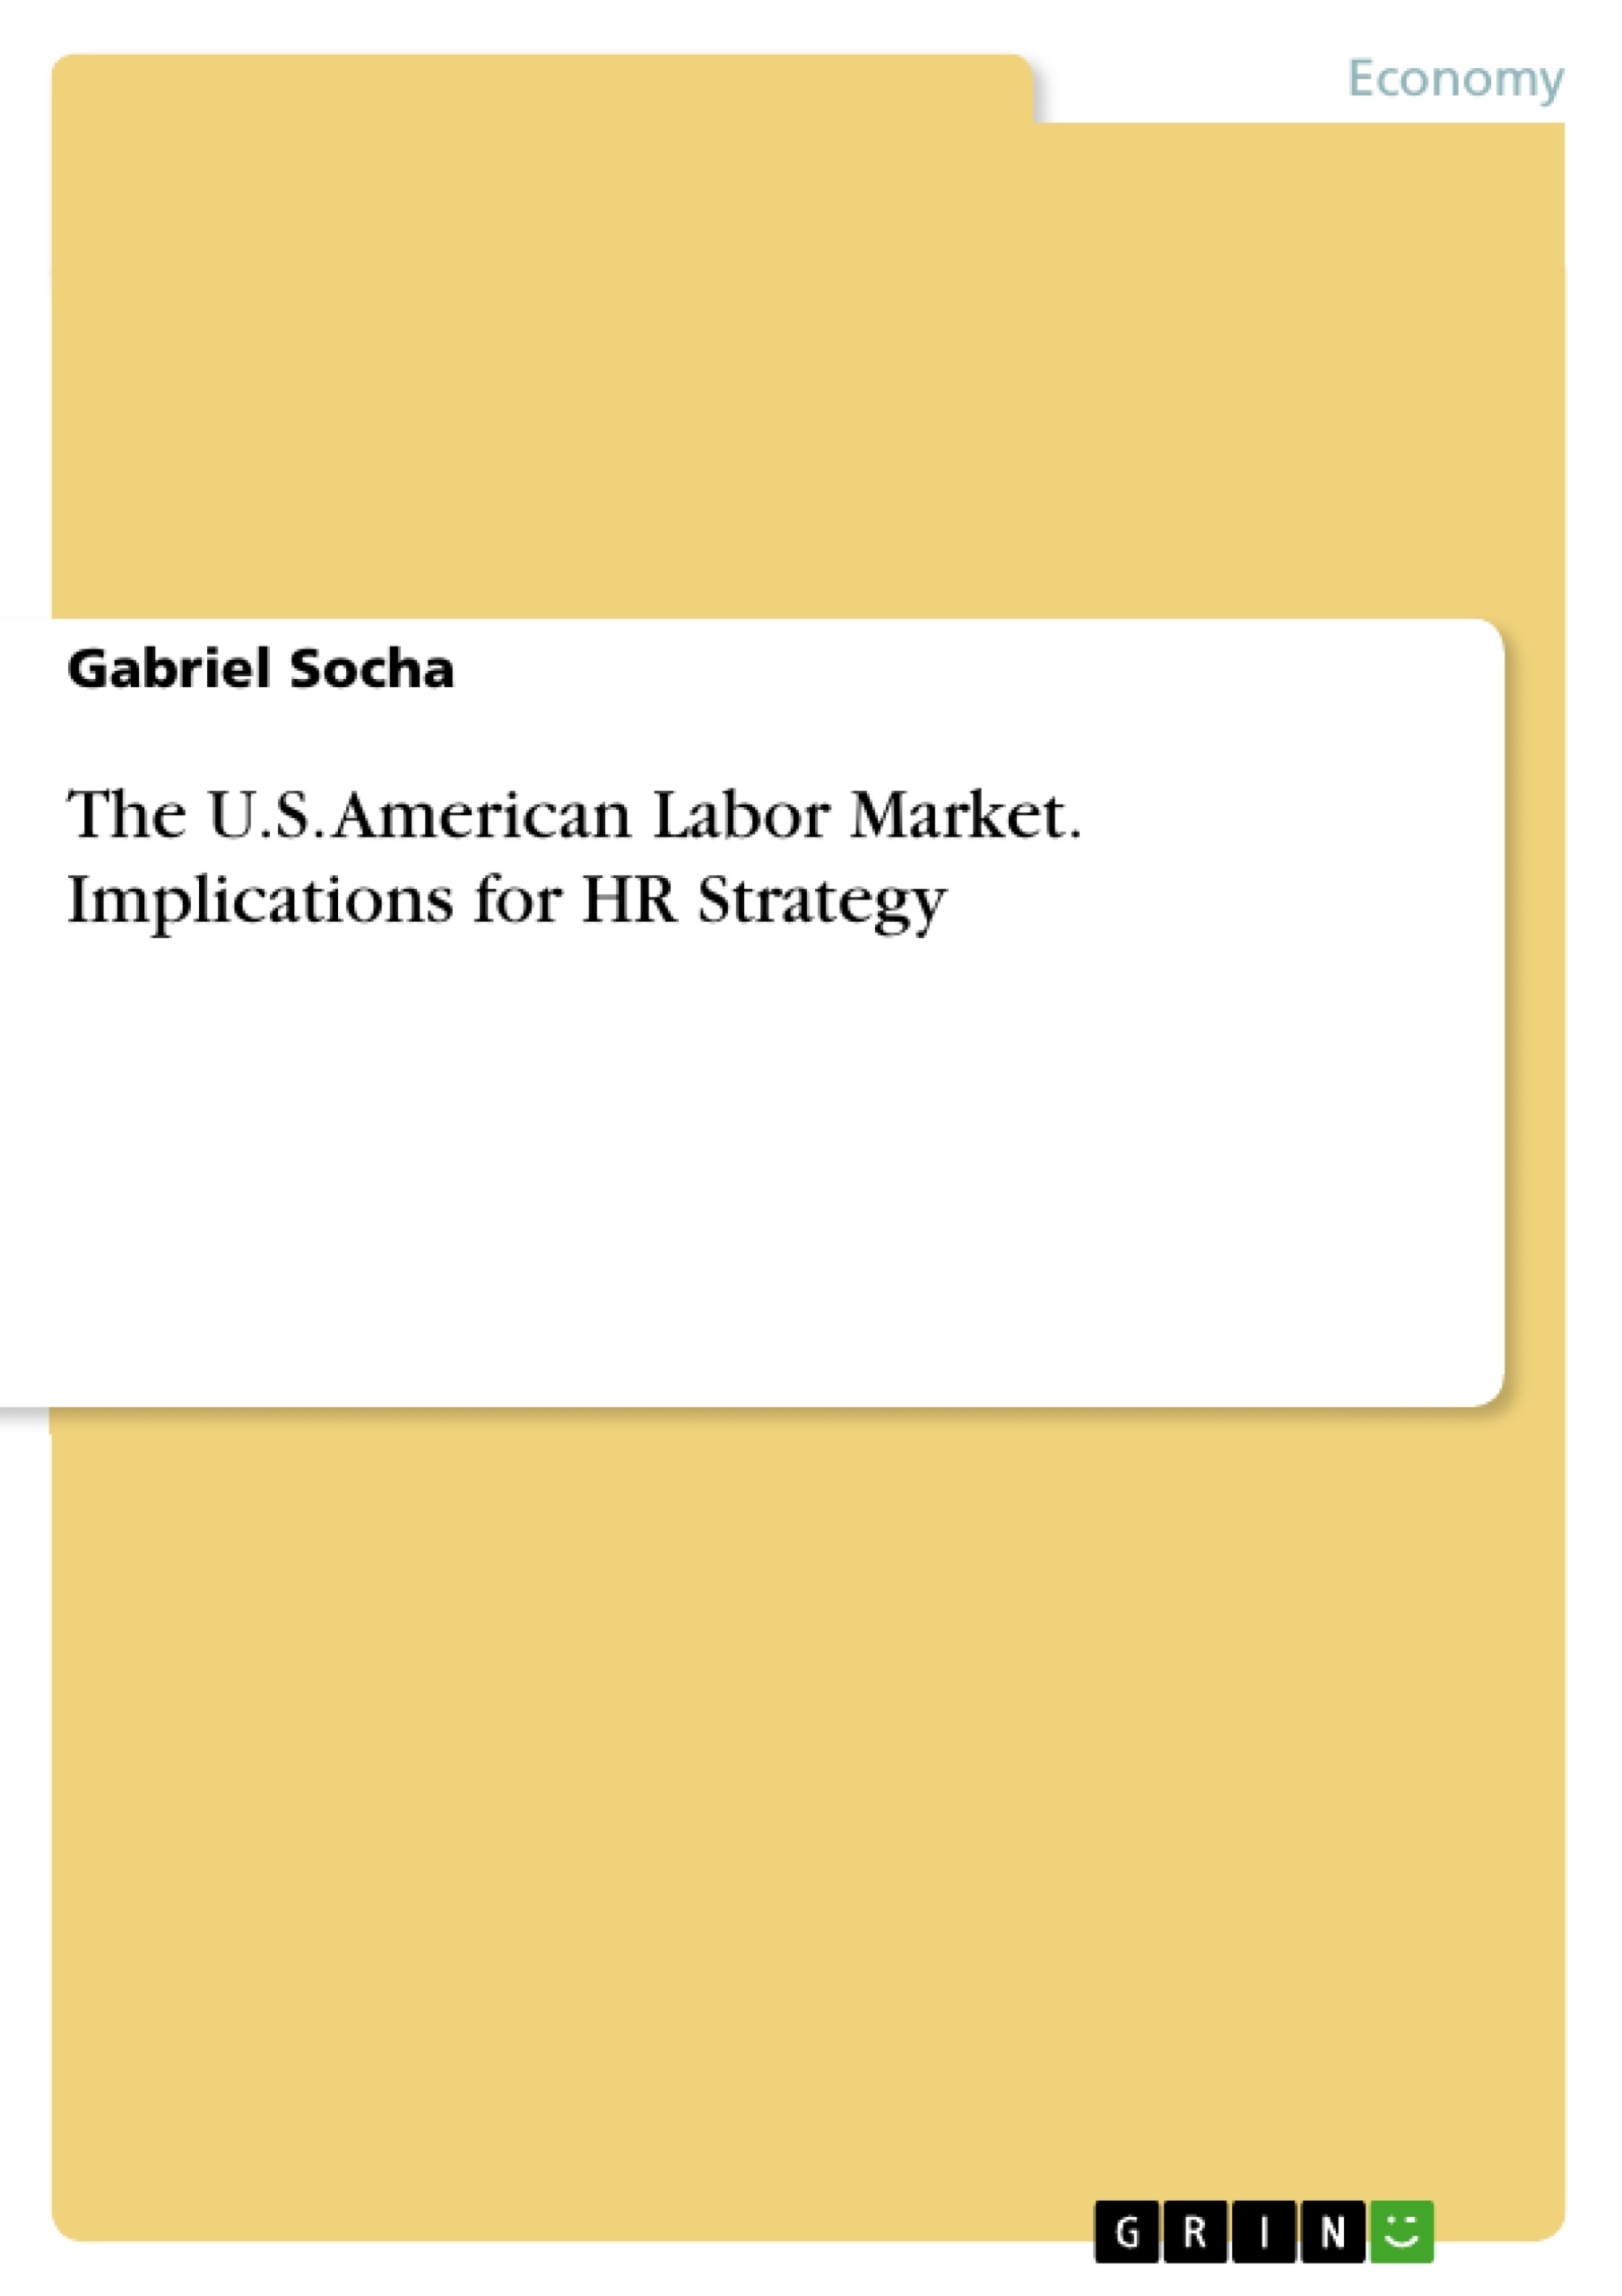 Title: The U.S. American Labor Market. Implications for HR Strategy